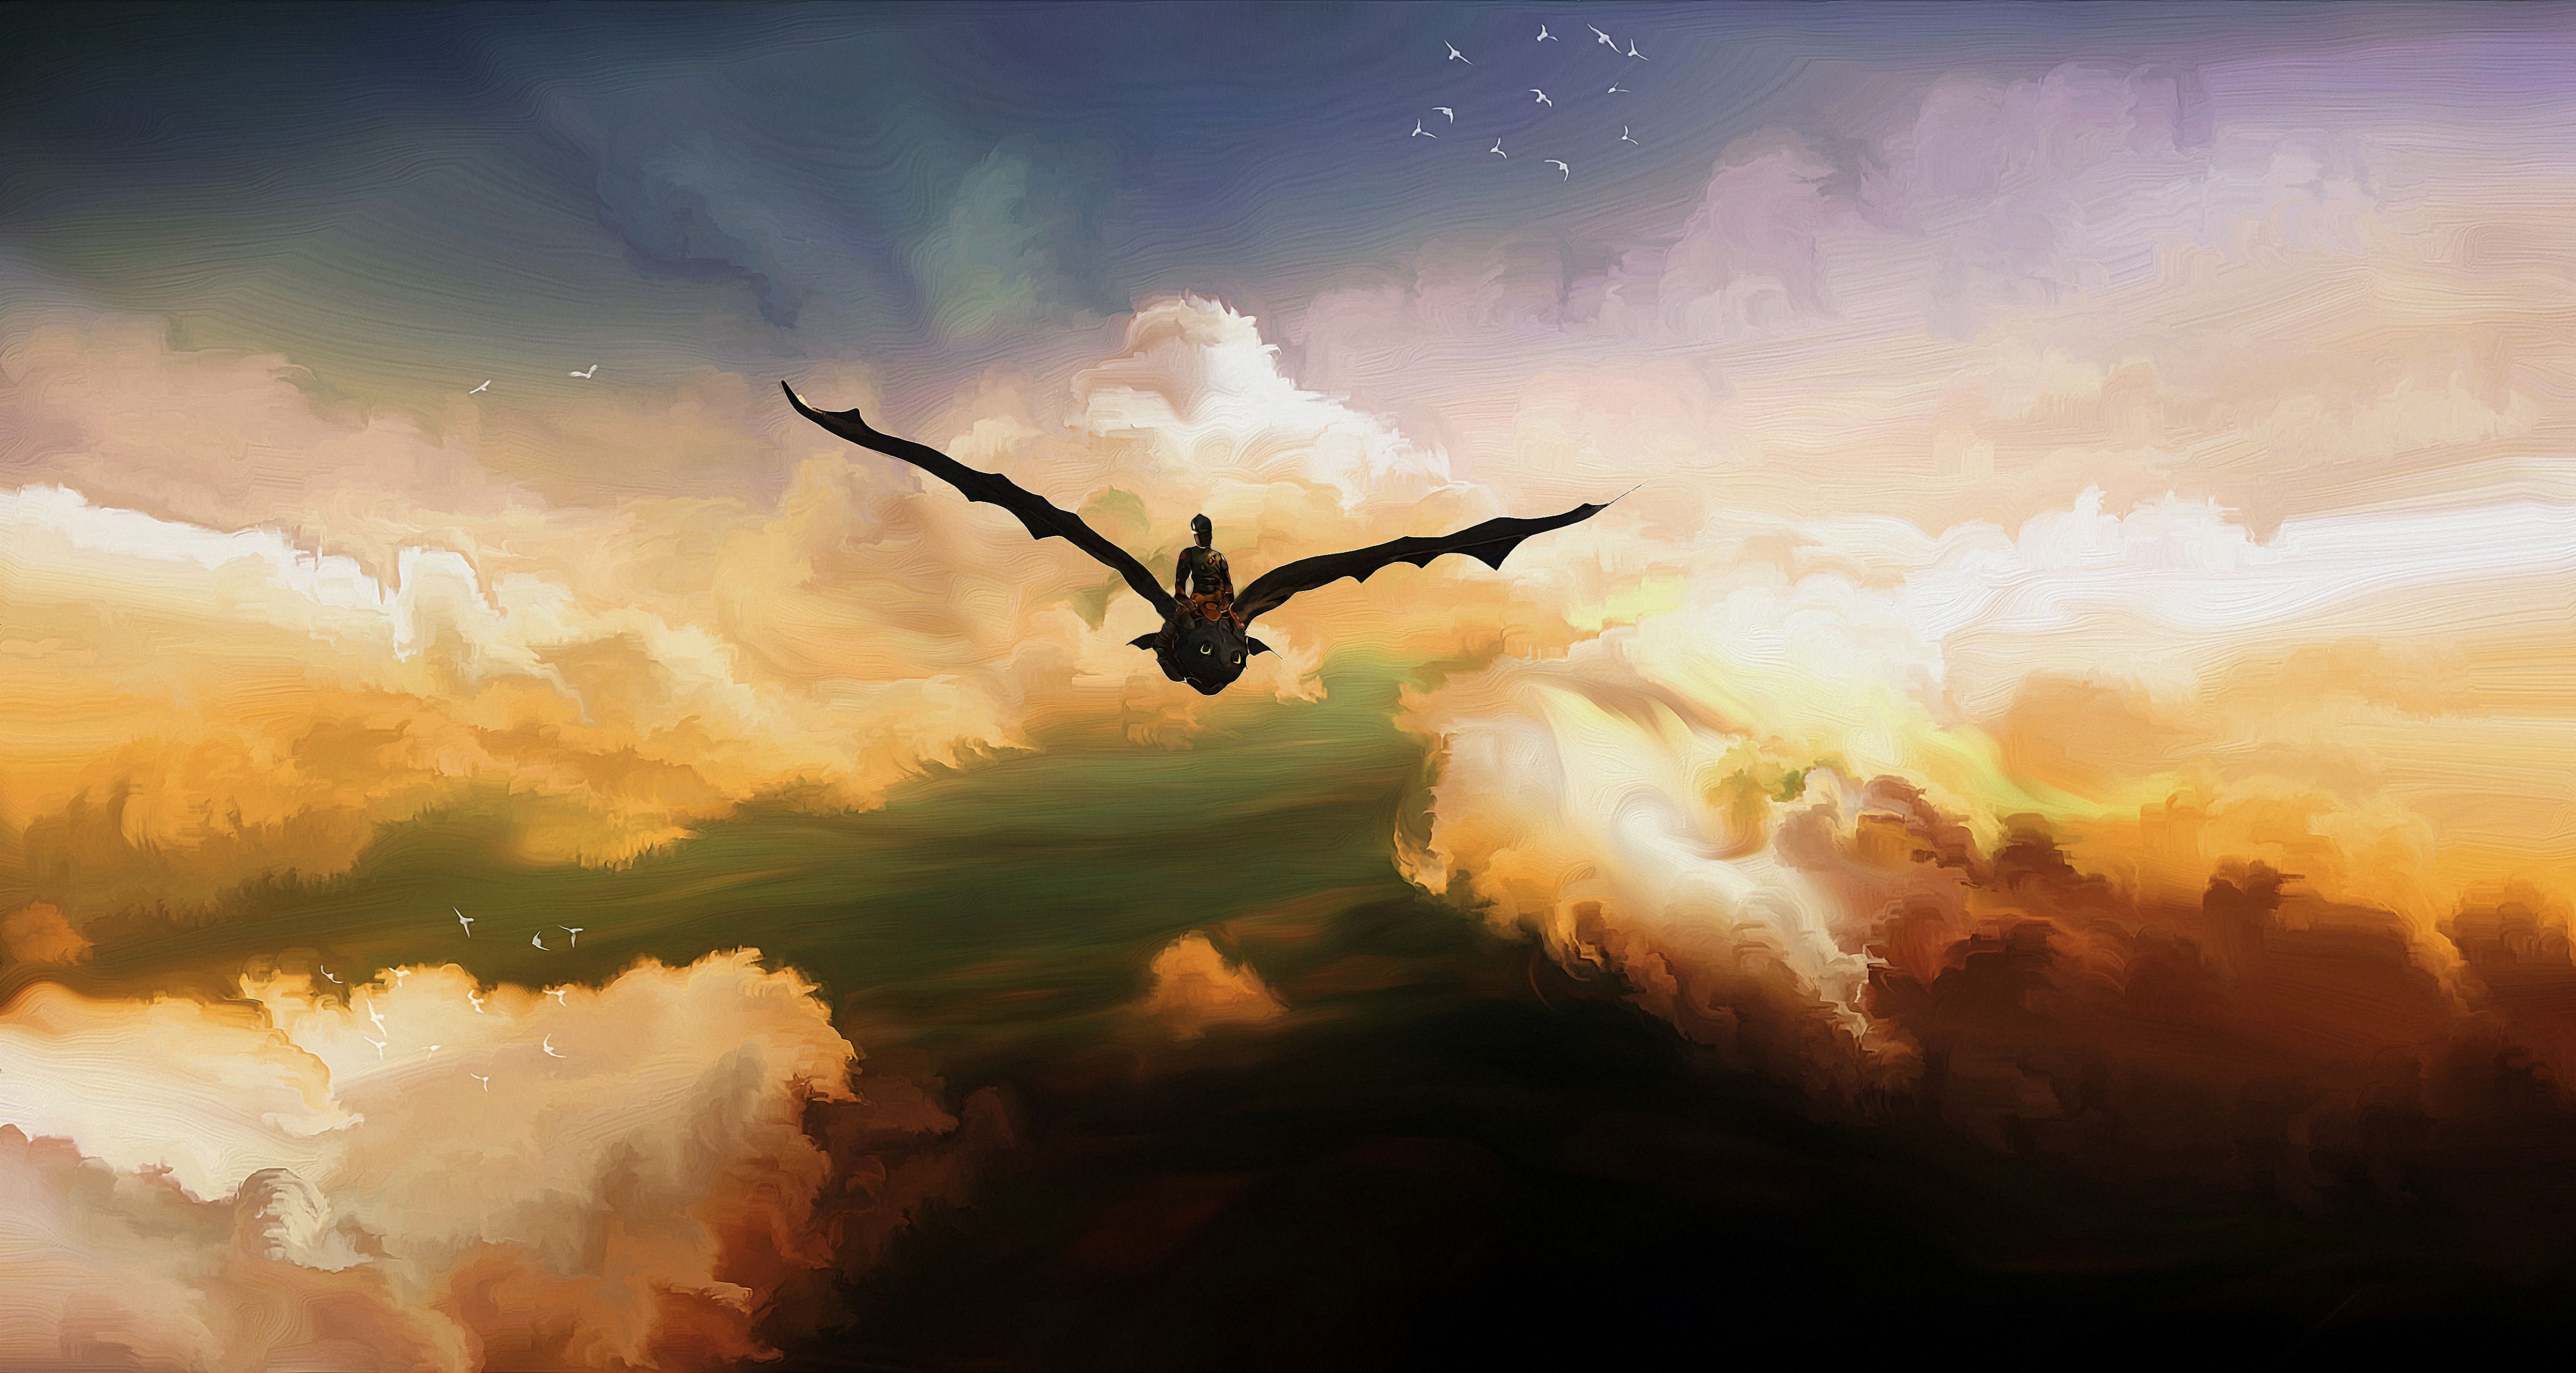 Awesome HTTYD2 wallpaper 2.0 - Adjusted the proportion of hiccup ...